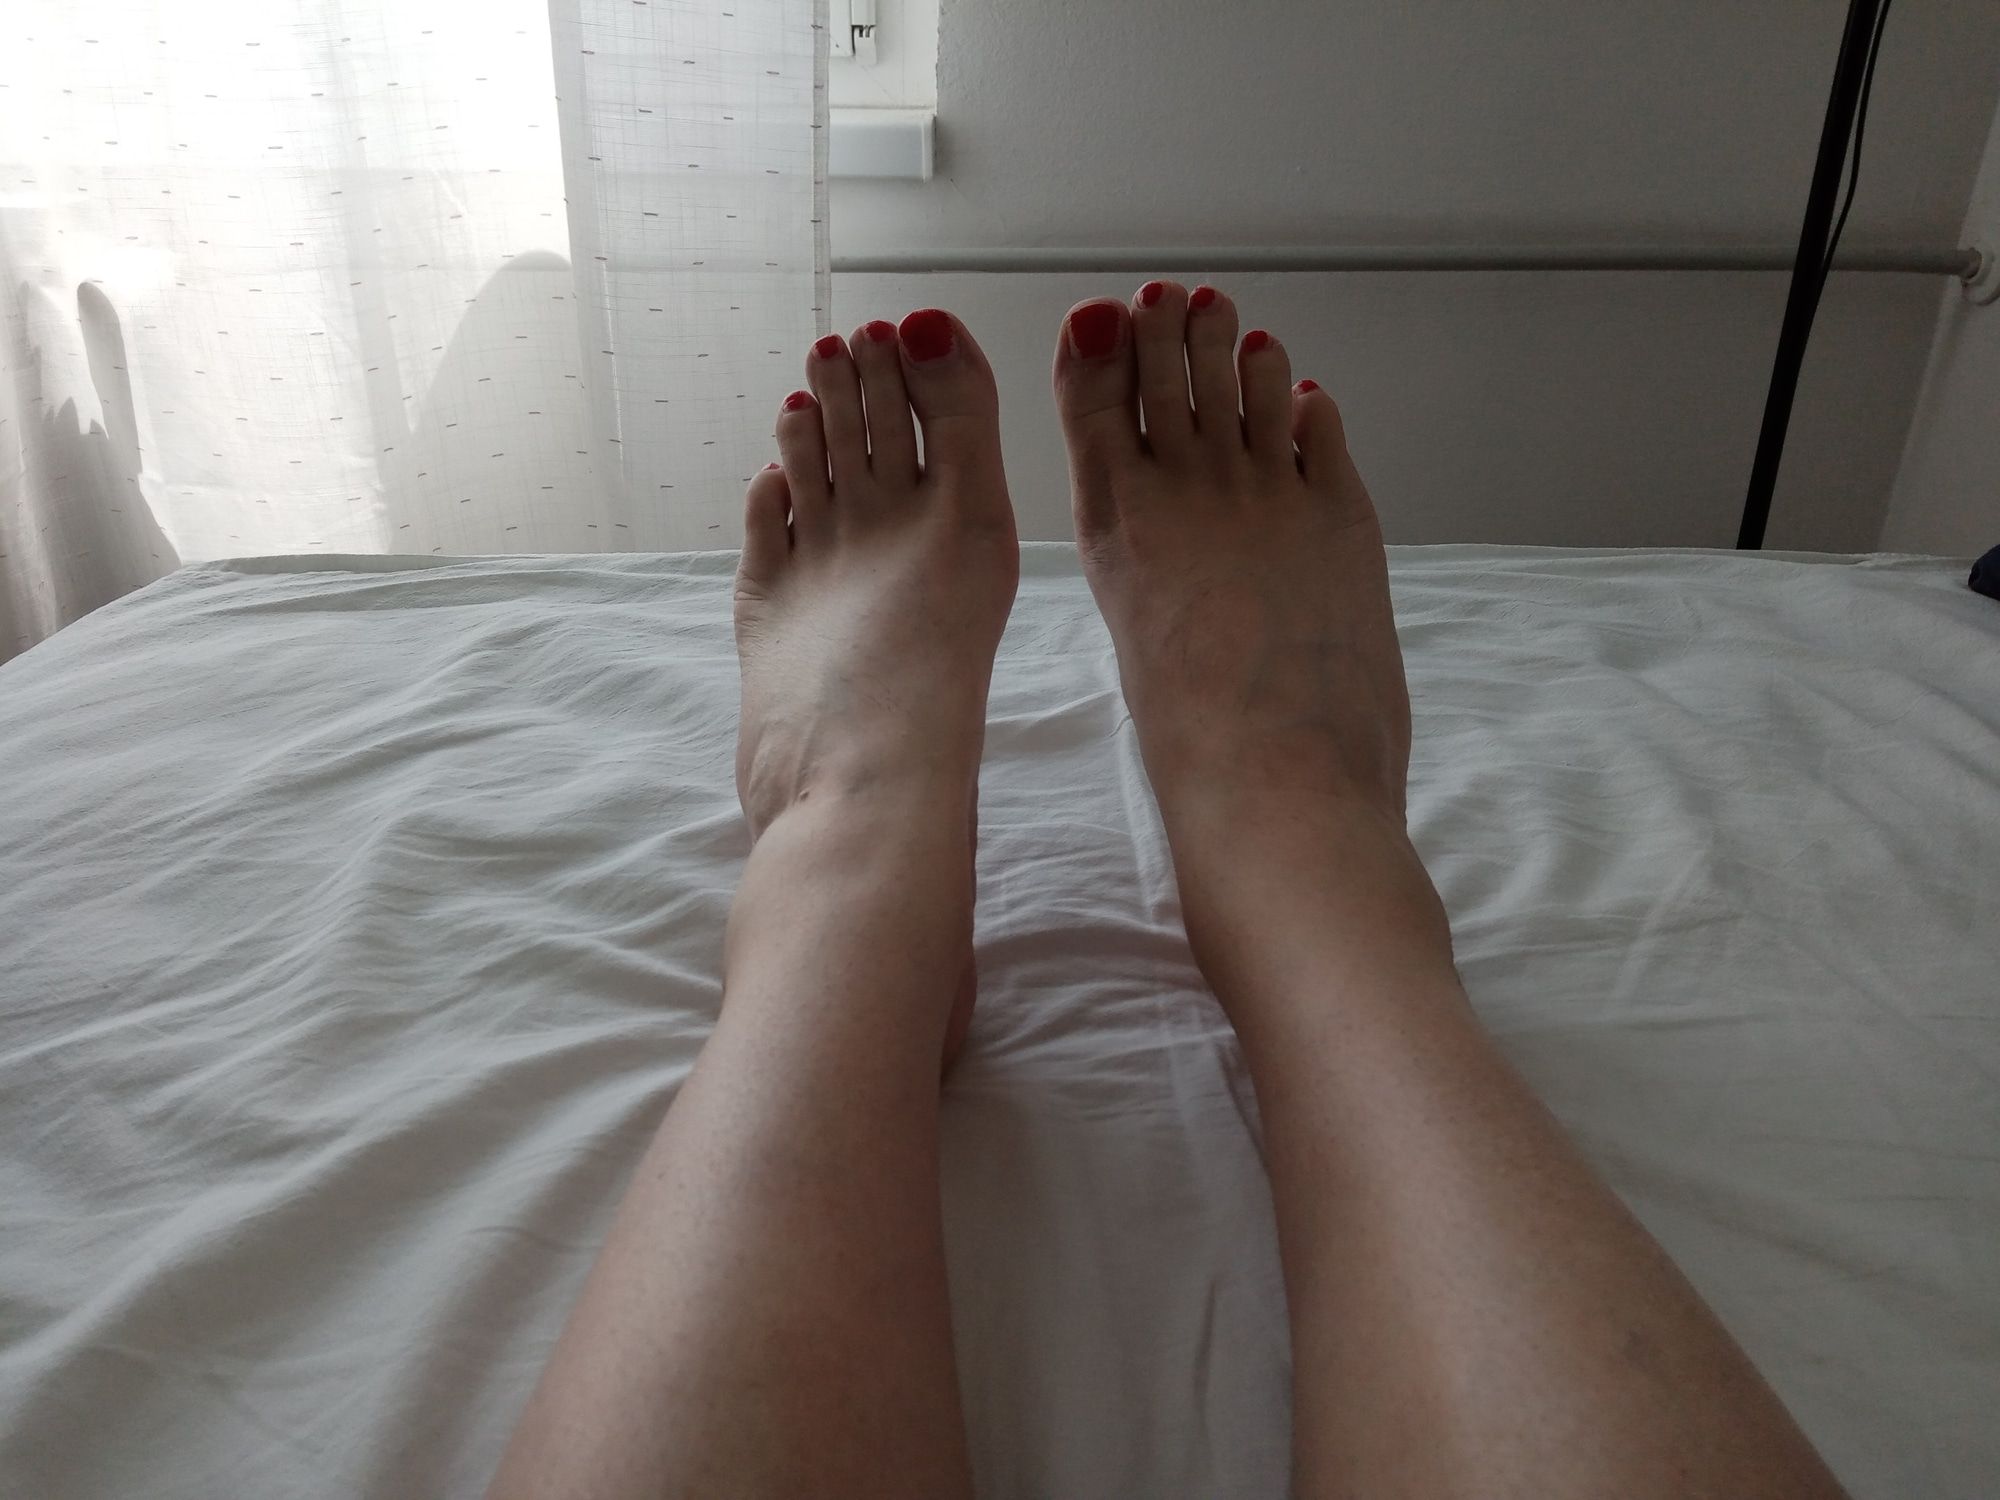 MILF tranny shows off her feet with red painted toes #3